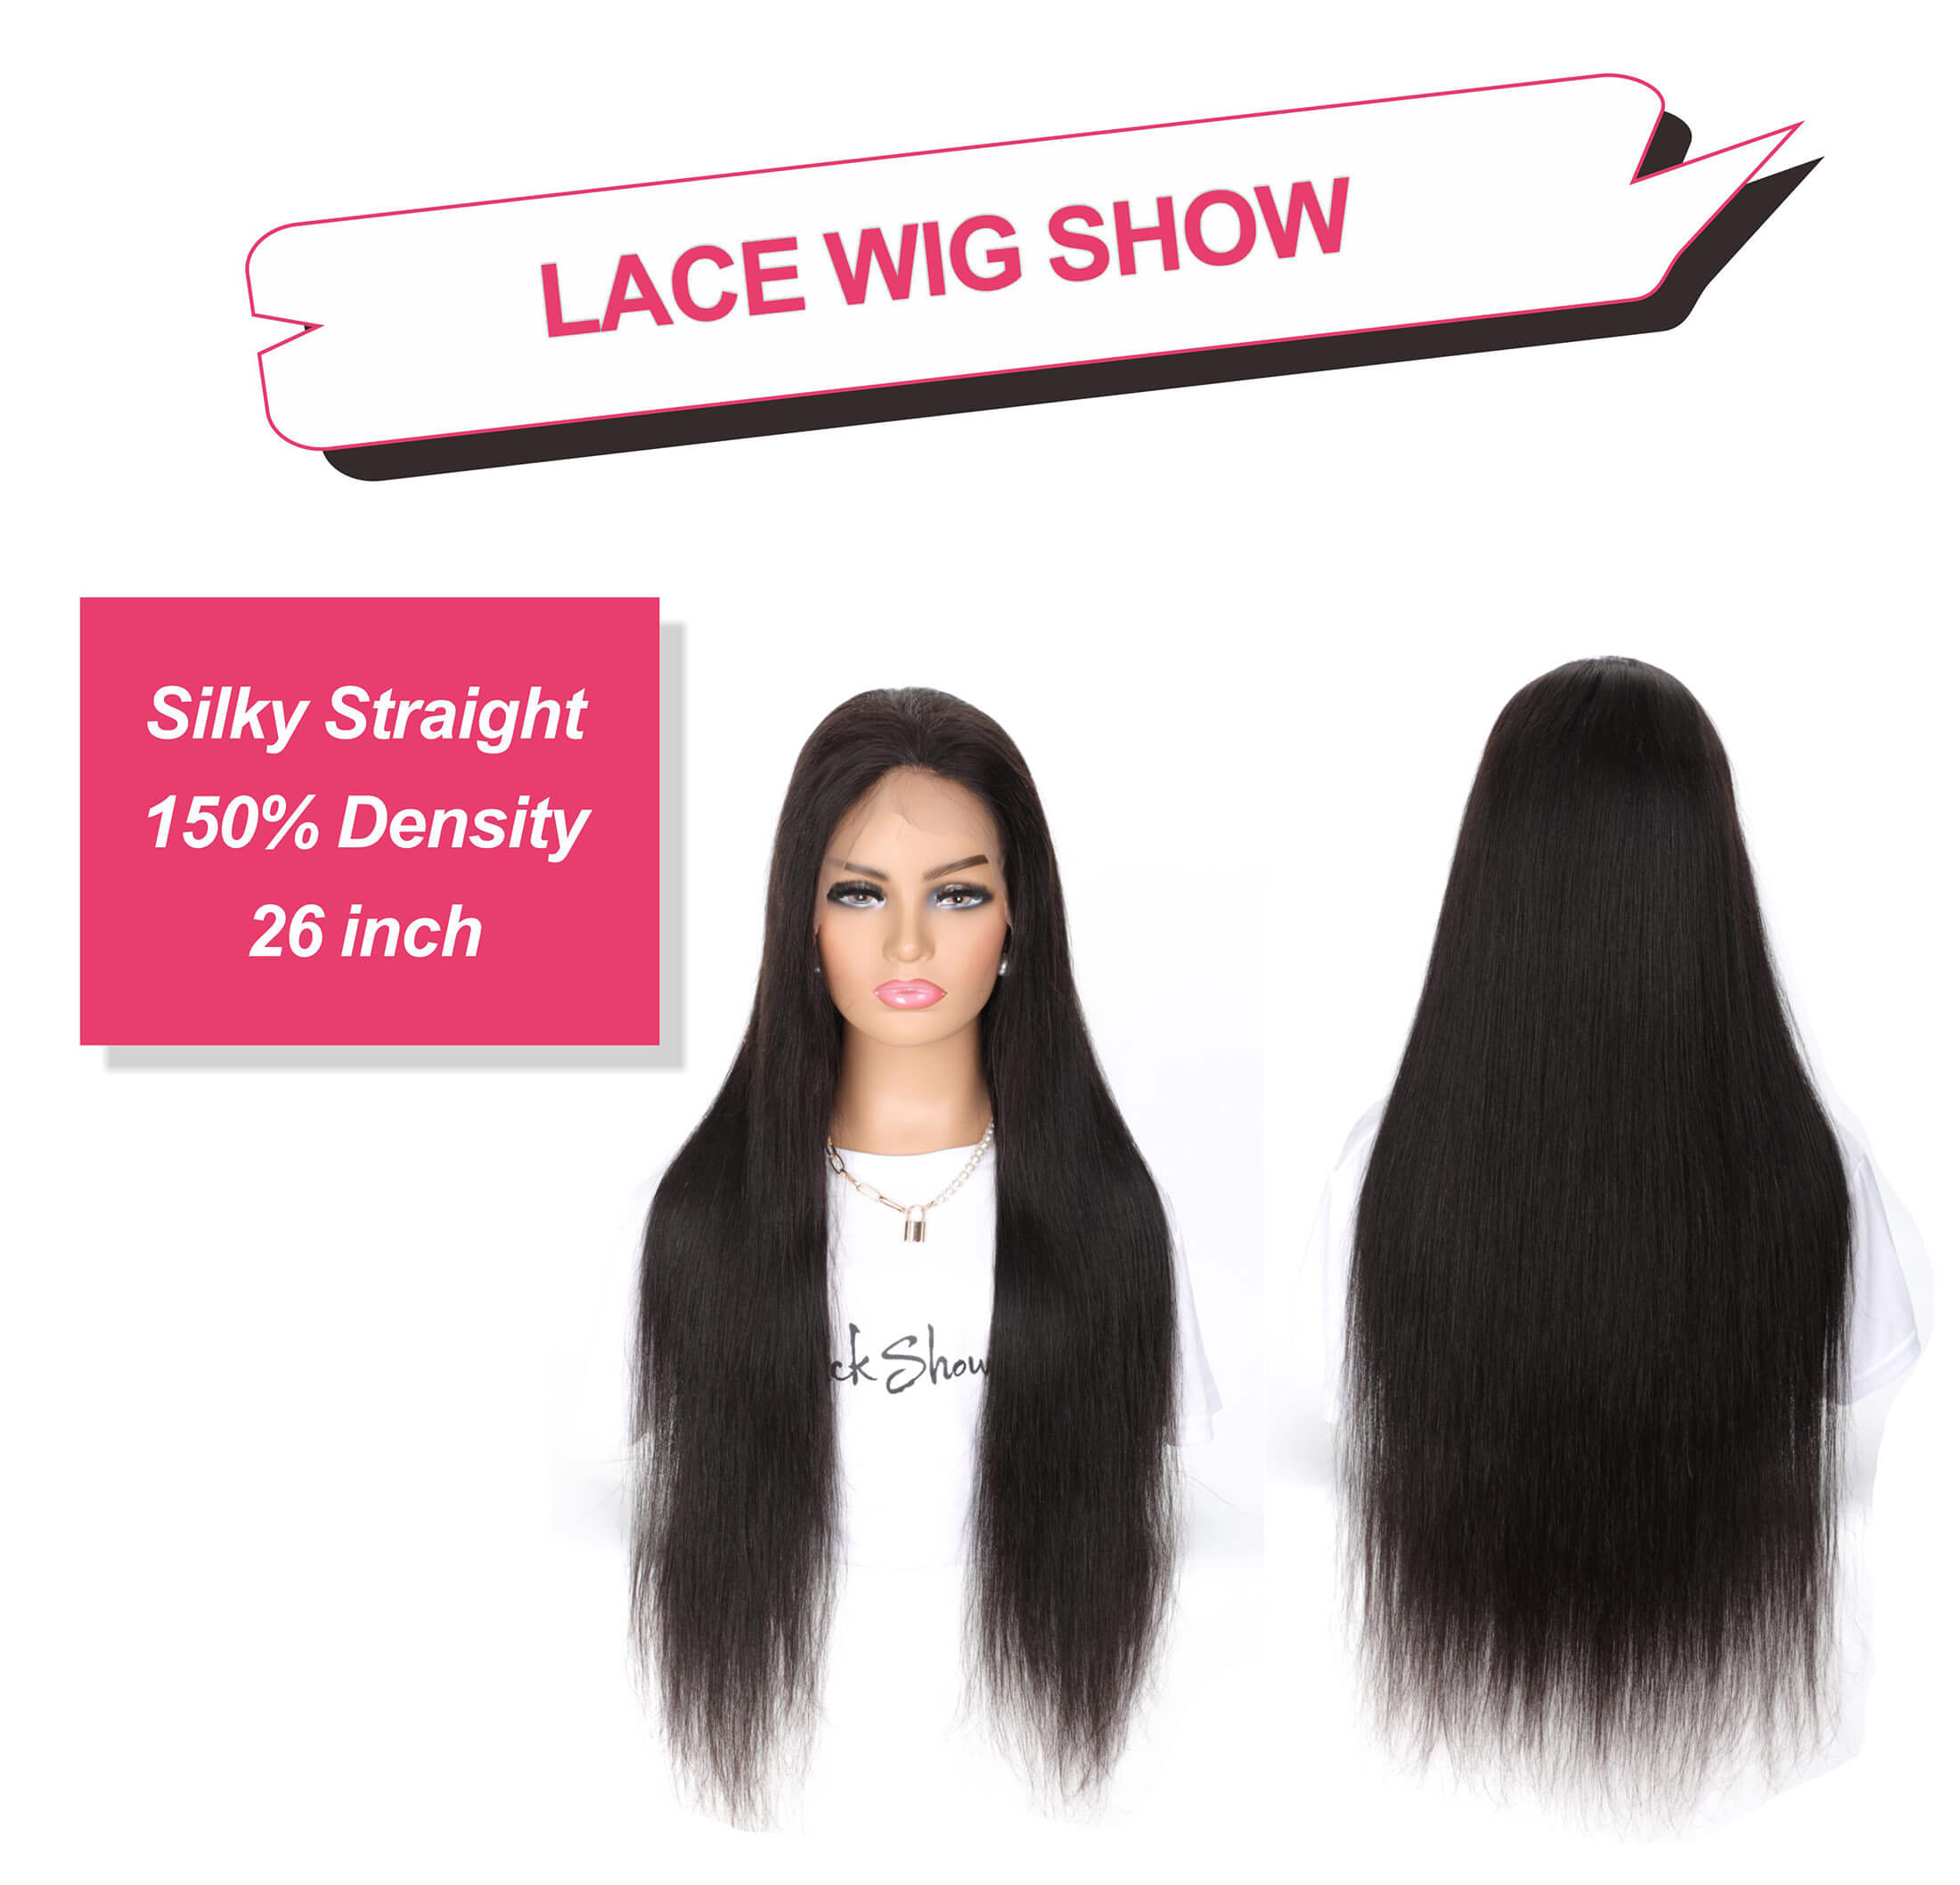 Black Show Hair silky straight transparent lace 4*4 lace closure wig